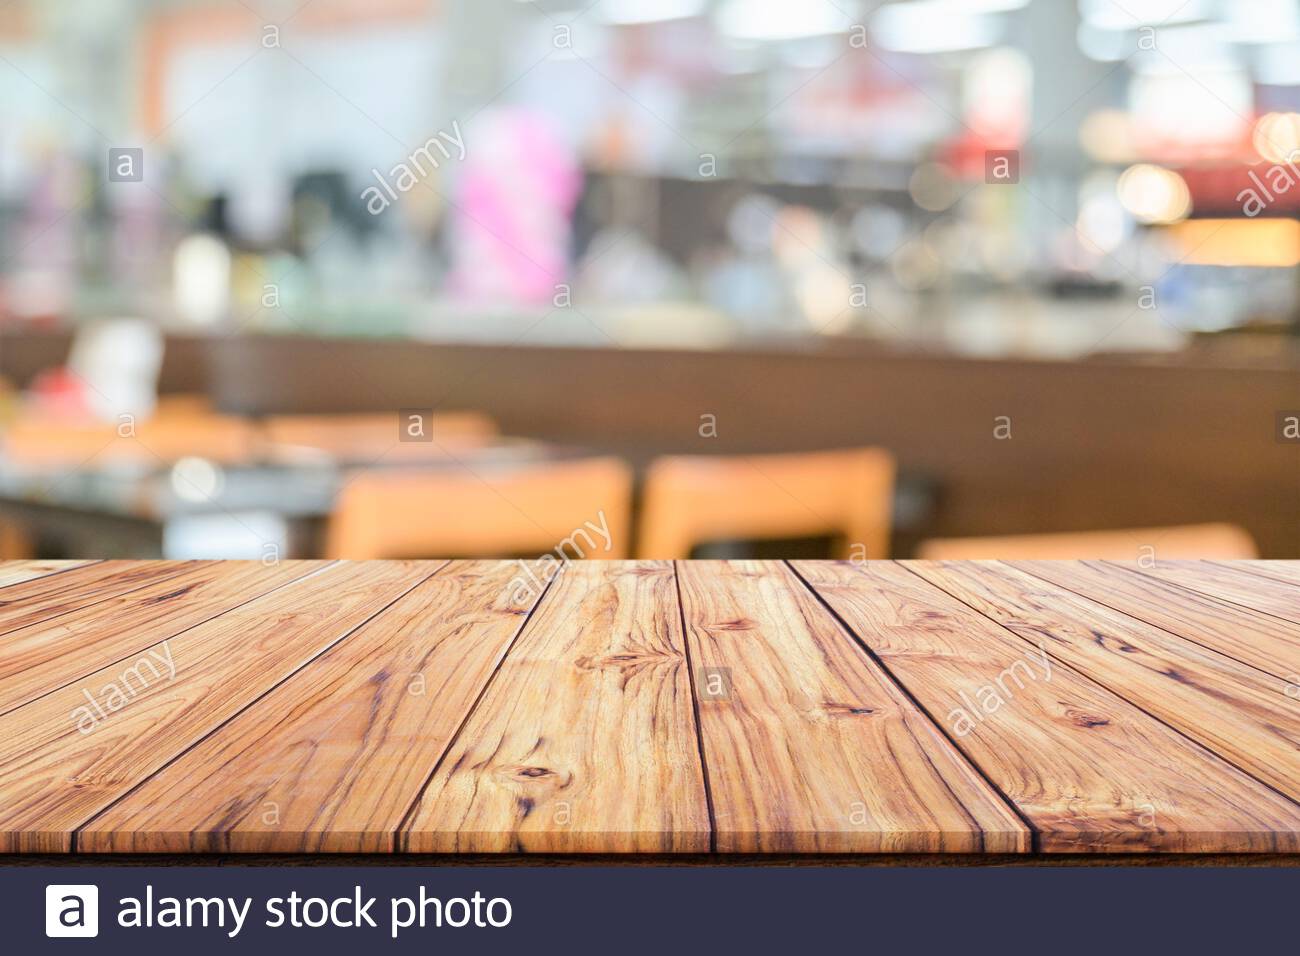 Wooden Table Top On Blurred Background Of Interior Coffee Shop Or